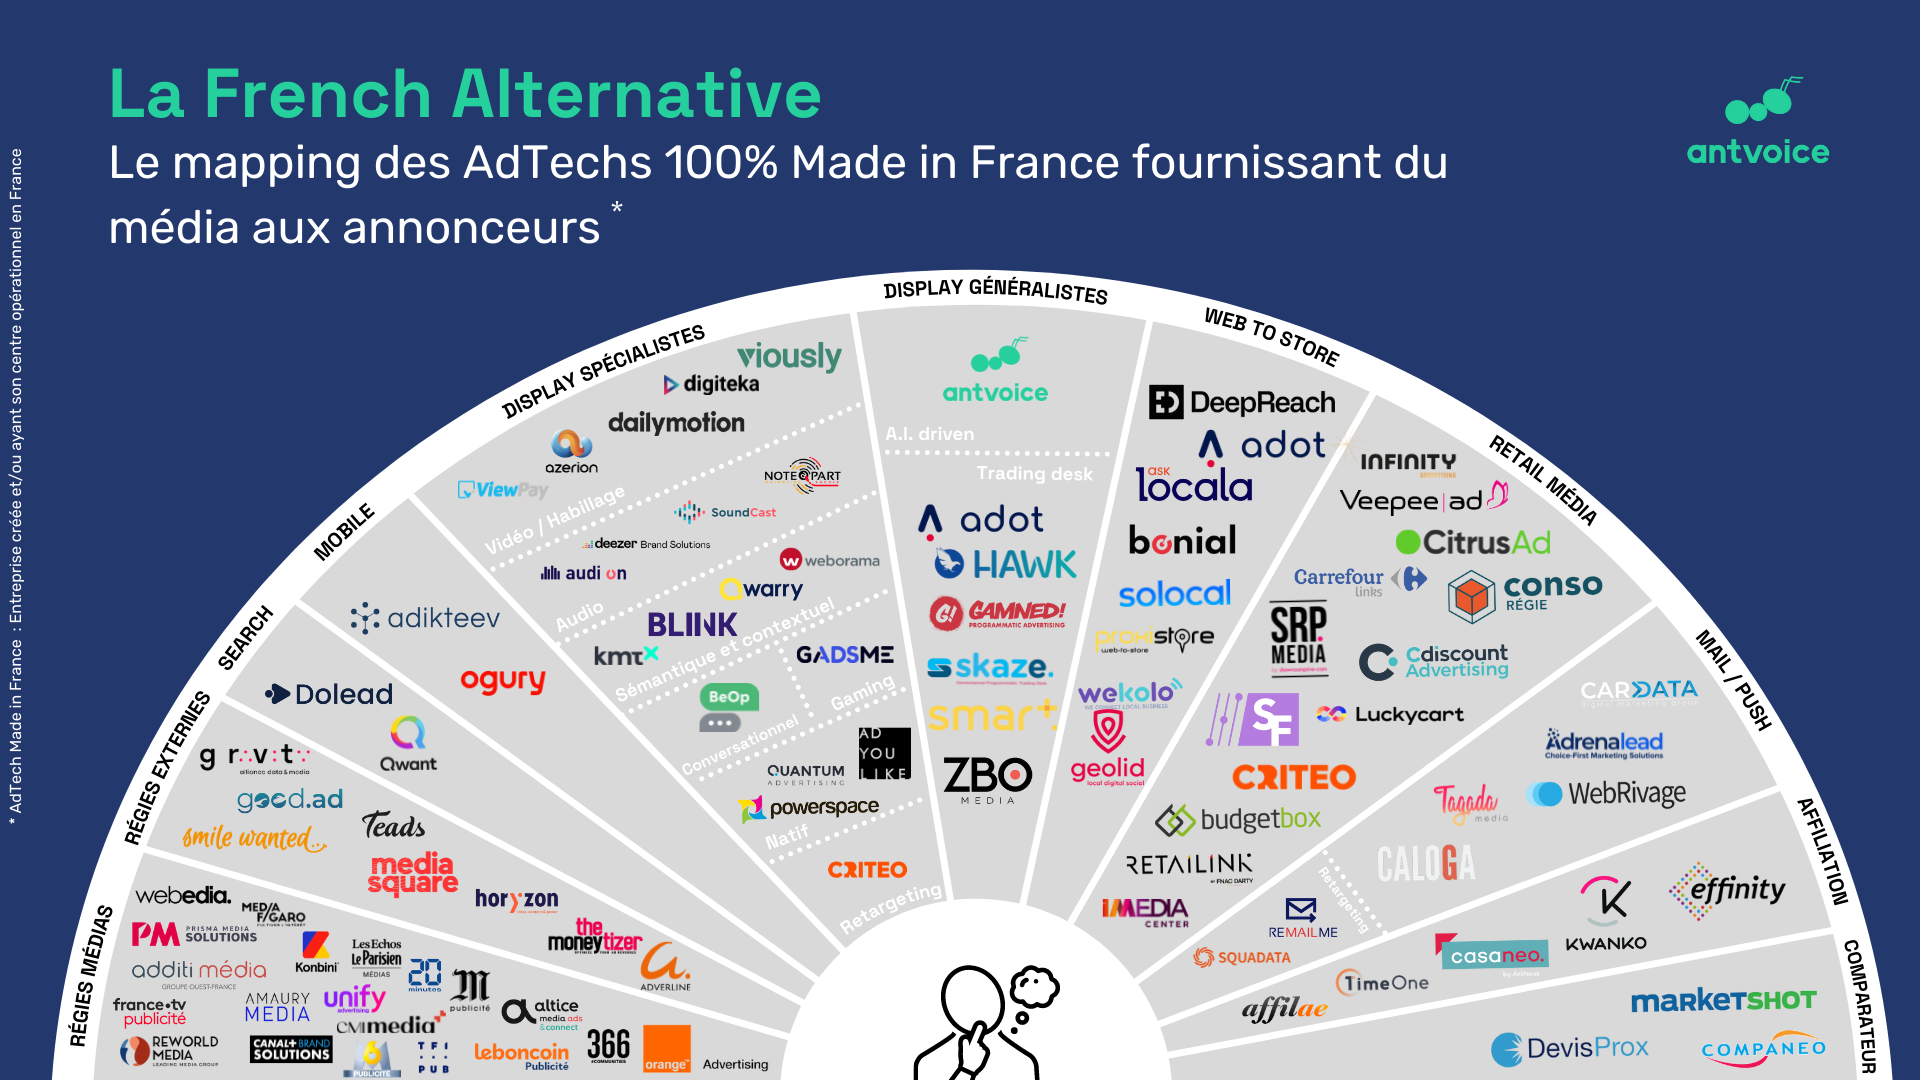 AntVoice-mapping-Adtech-made-in-france-french-alternative-1